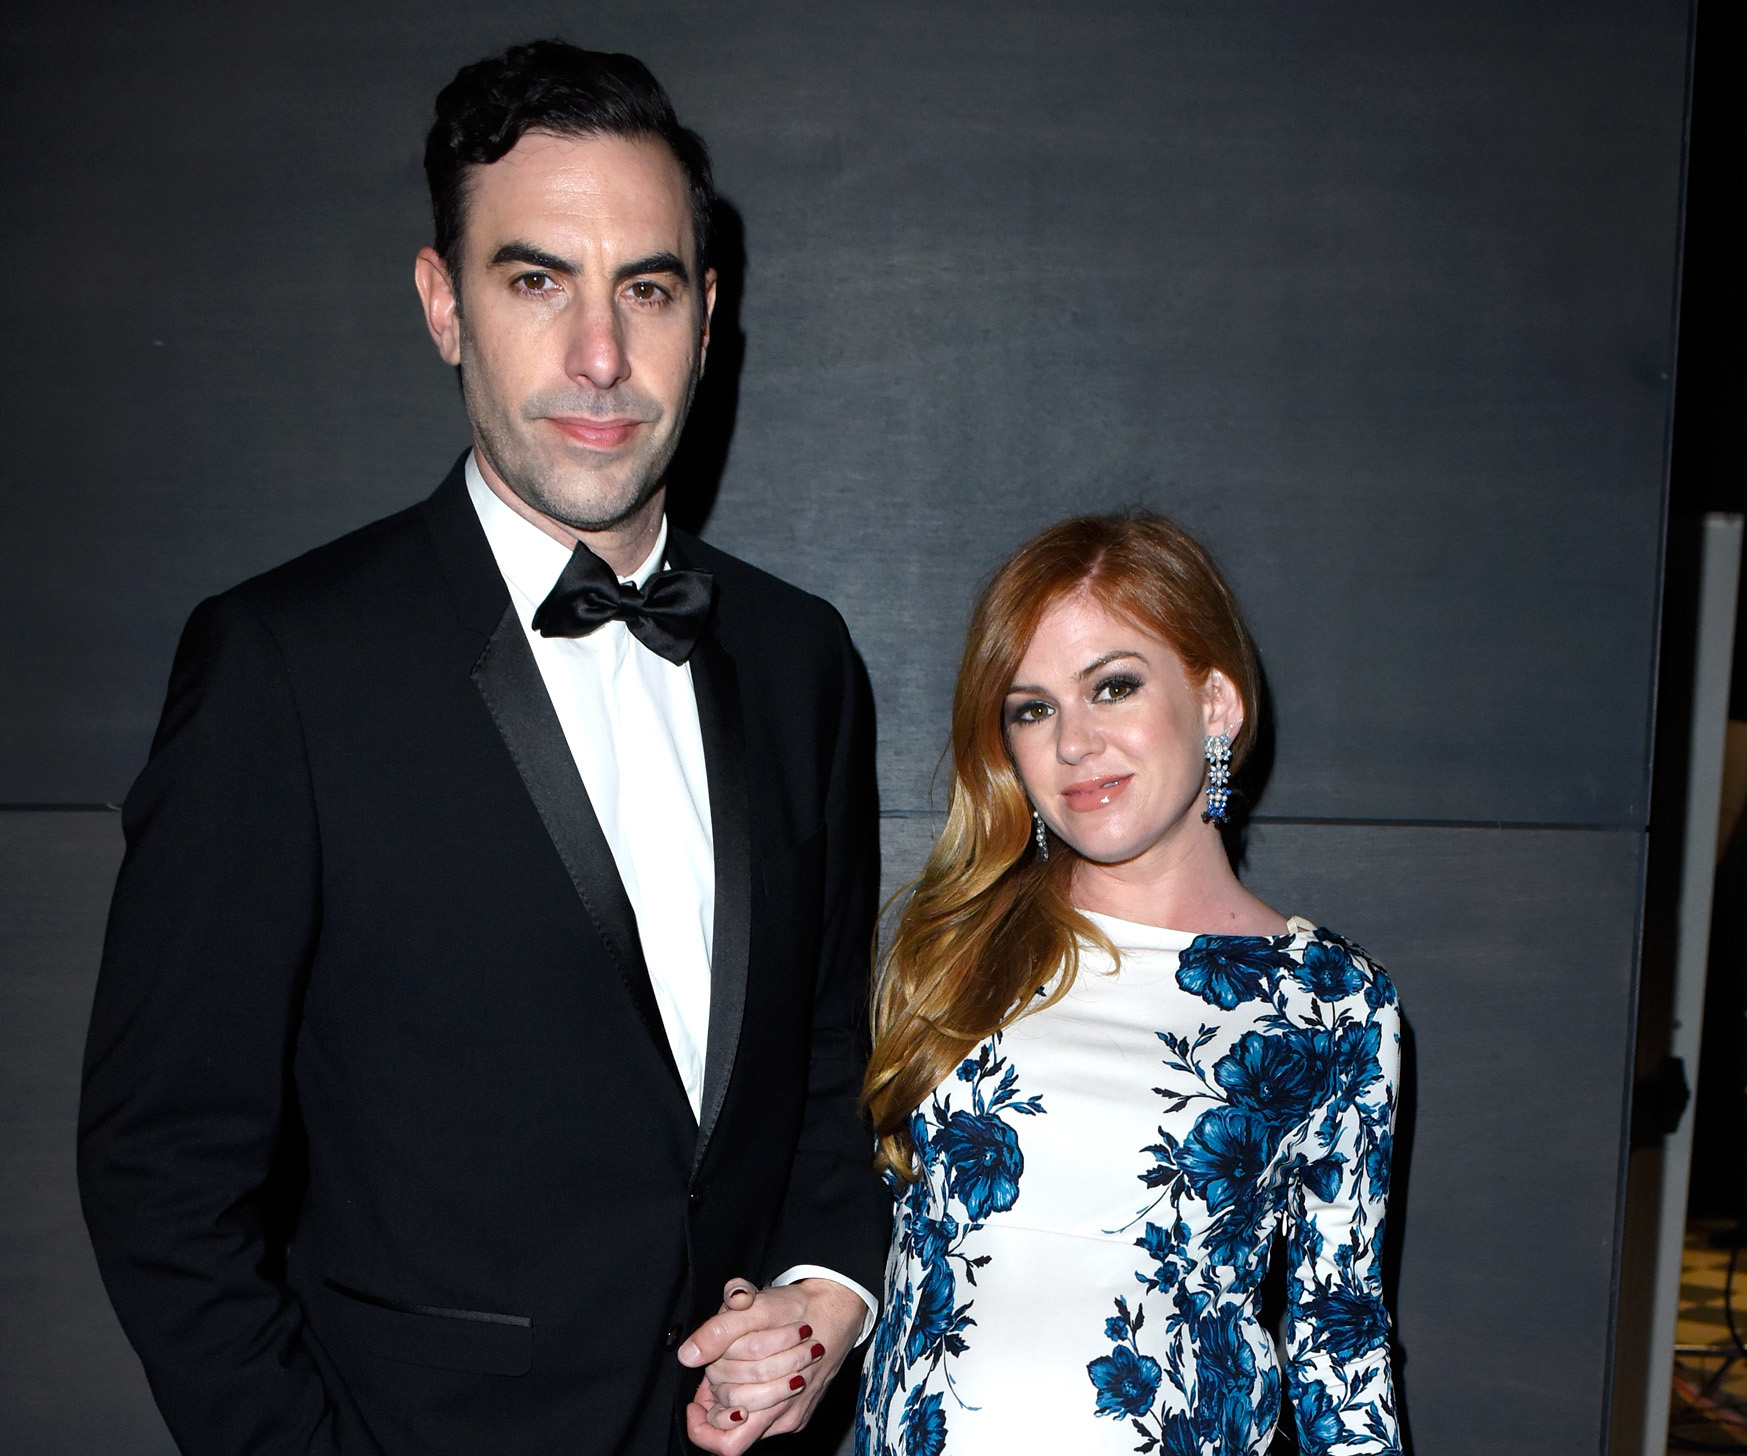 Aussie star Isla Fisher and husband Sacha Baron Cohen donate $1 million to Syrian refugees